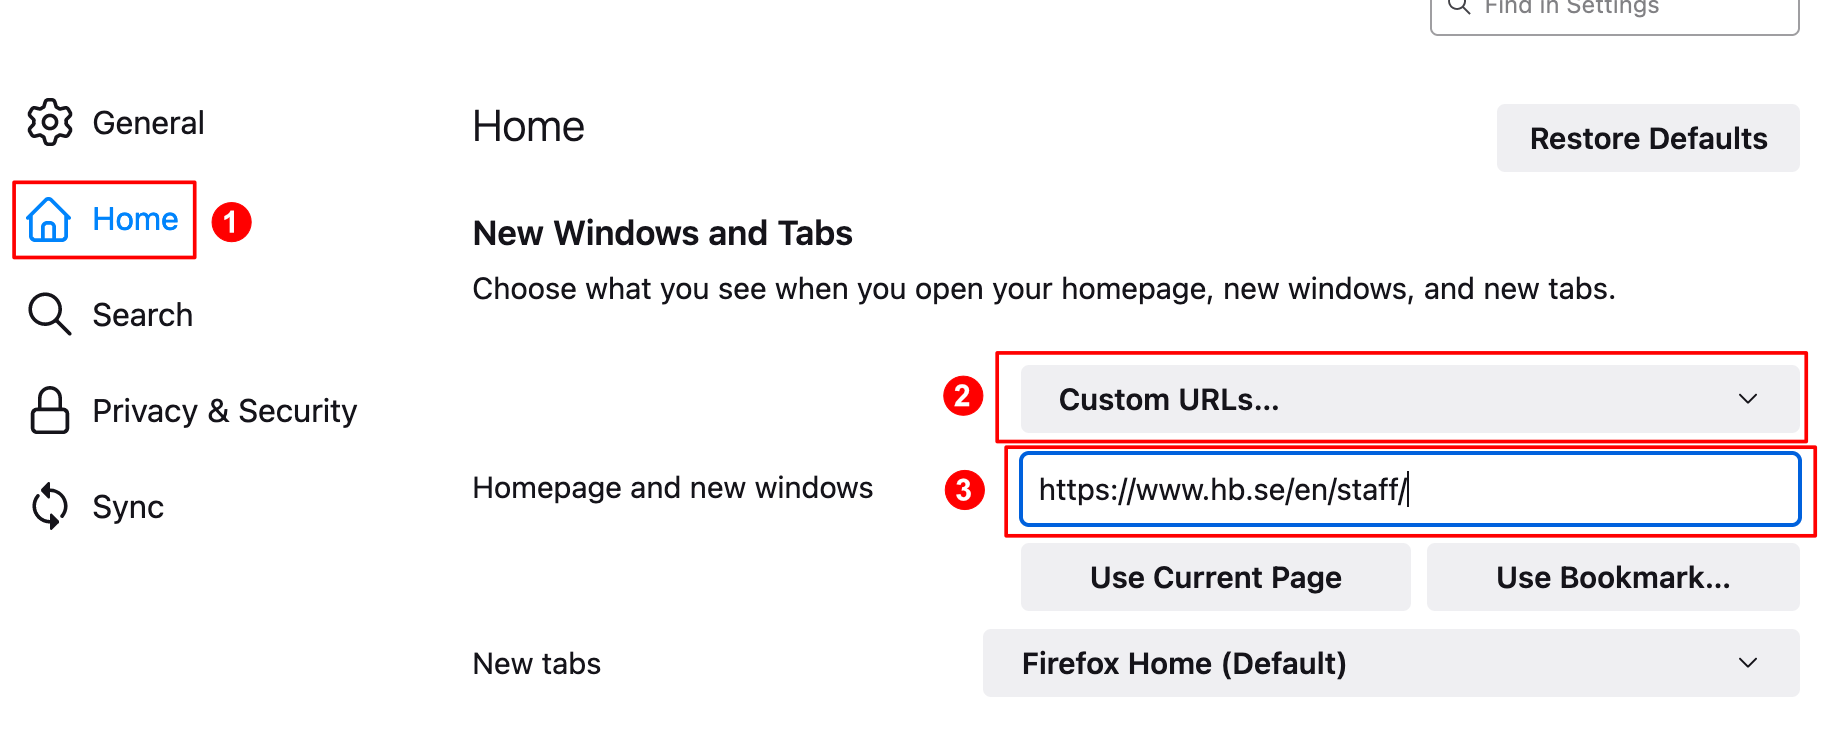 How to make the personal start page your web browser home page in Firefox (Mac)